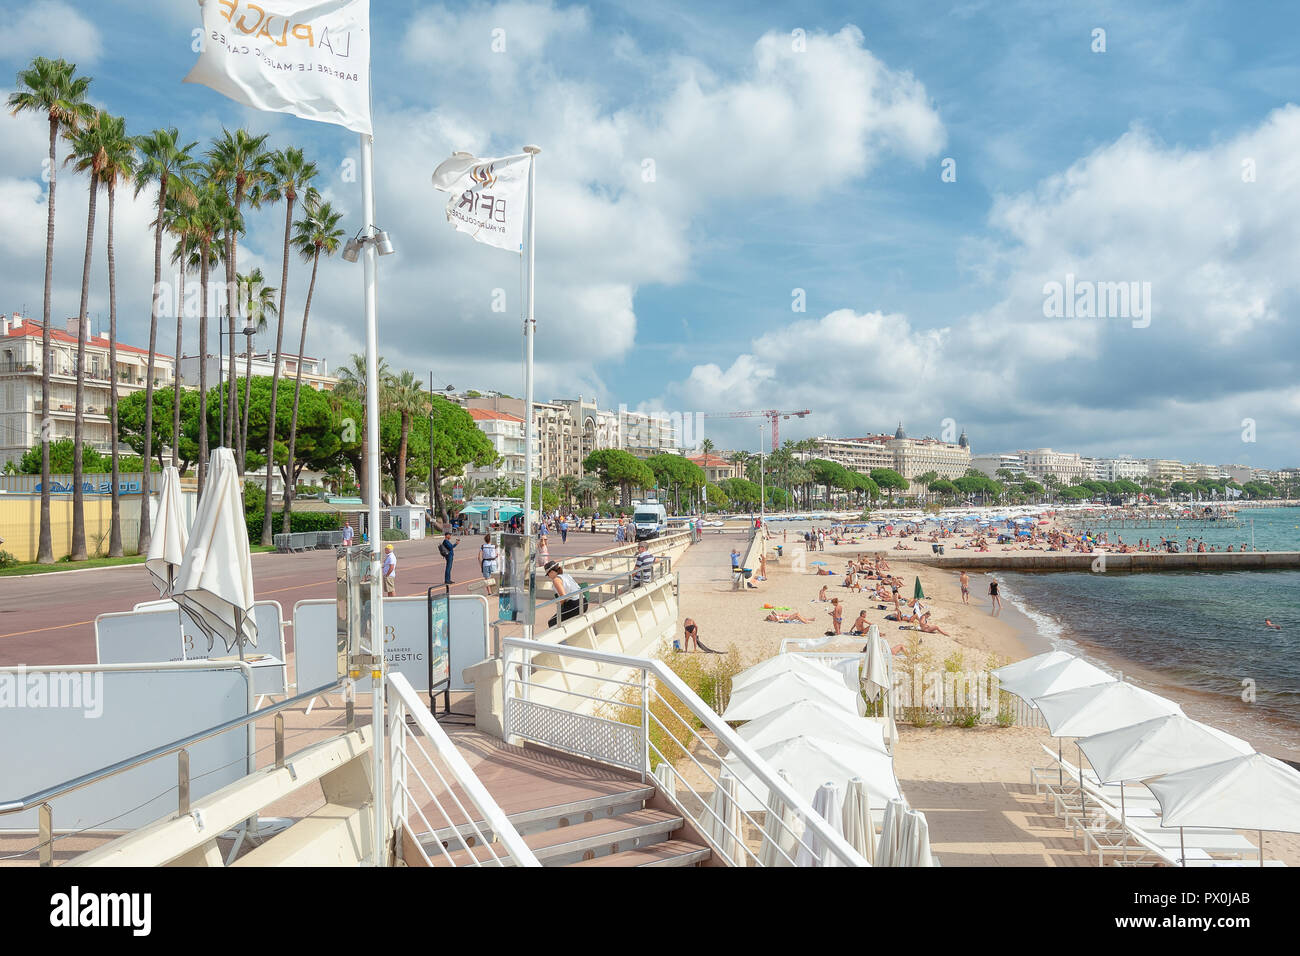 Cannes, France, September 15, 2018:  The beach of the French city of Cannes on the French Riviera Stock Photo